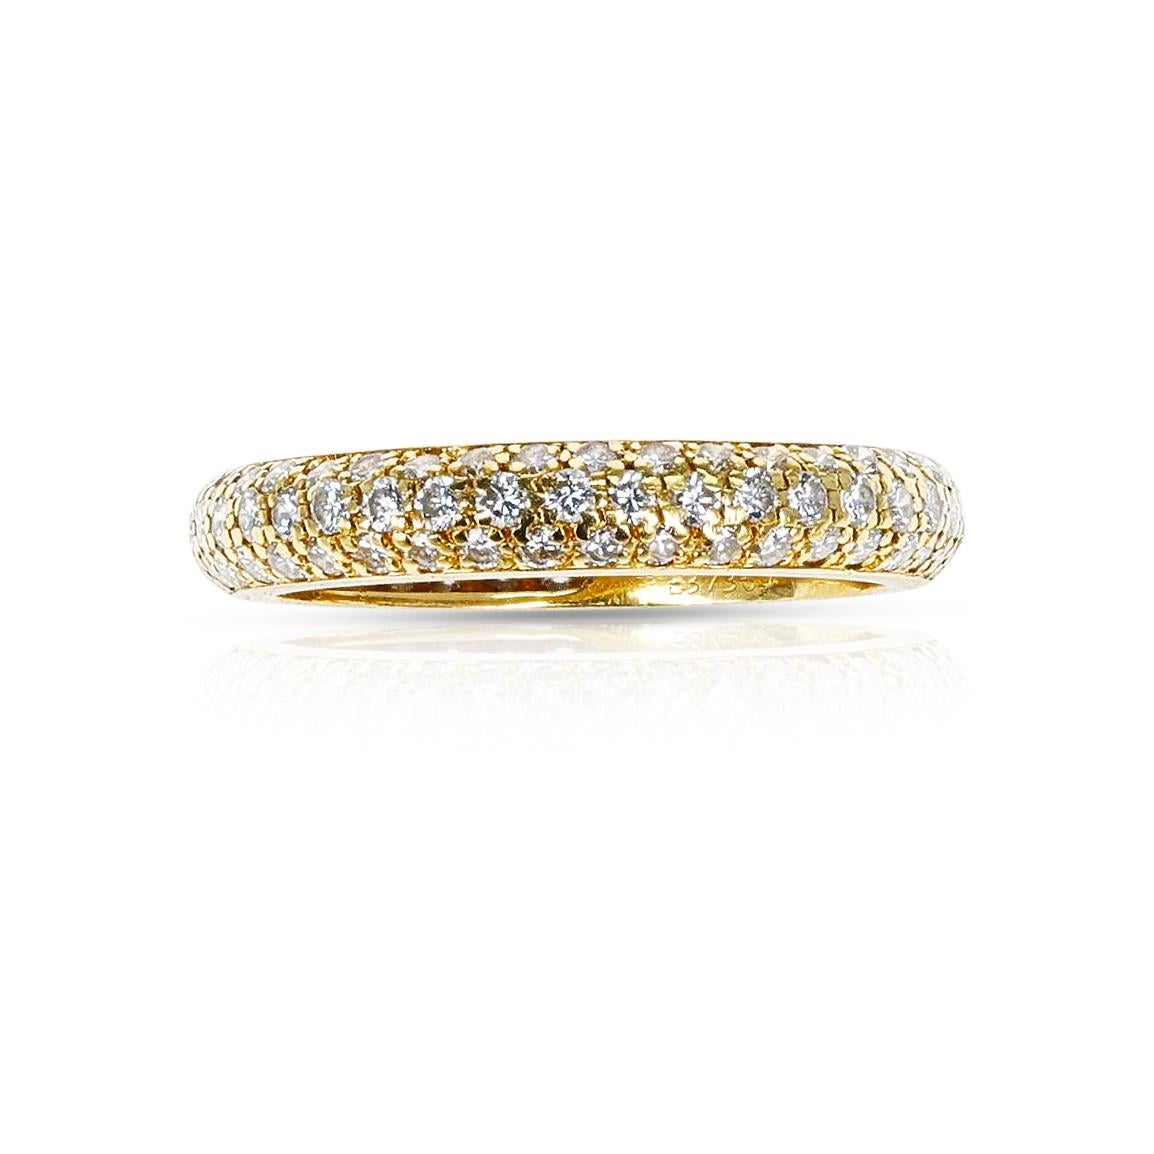 A  Cartier Three Row Round Diamond Band, 18K Gold. The Ring Size is US 6.50. The total weight of the ring is 2.85 grams. 


